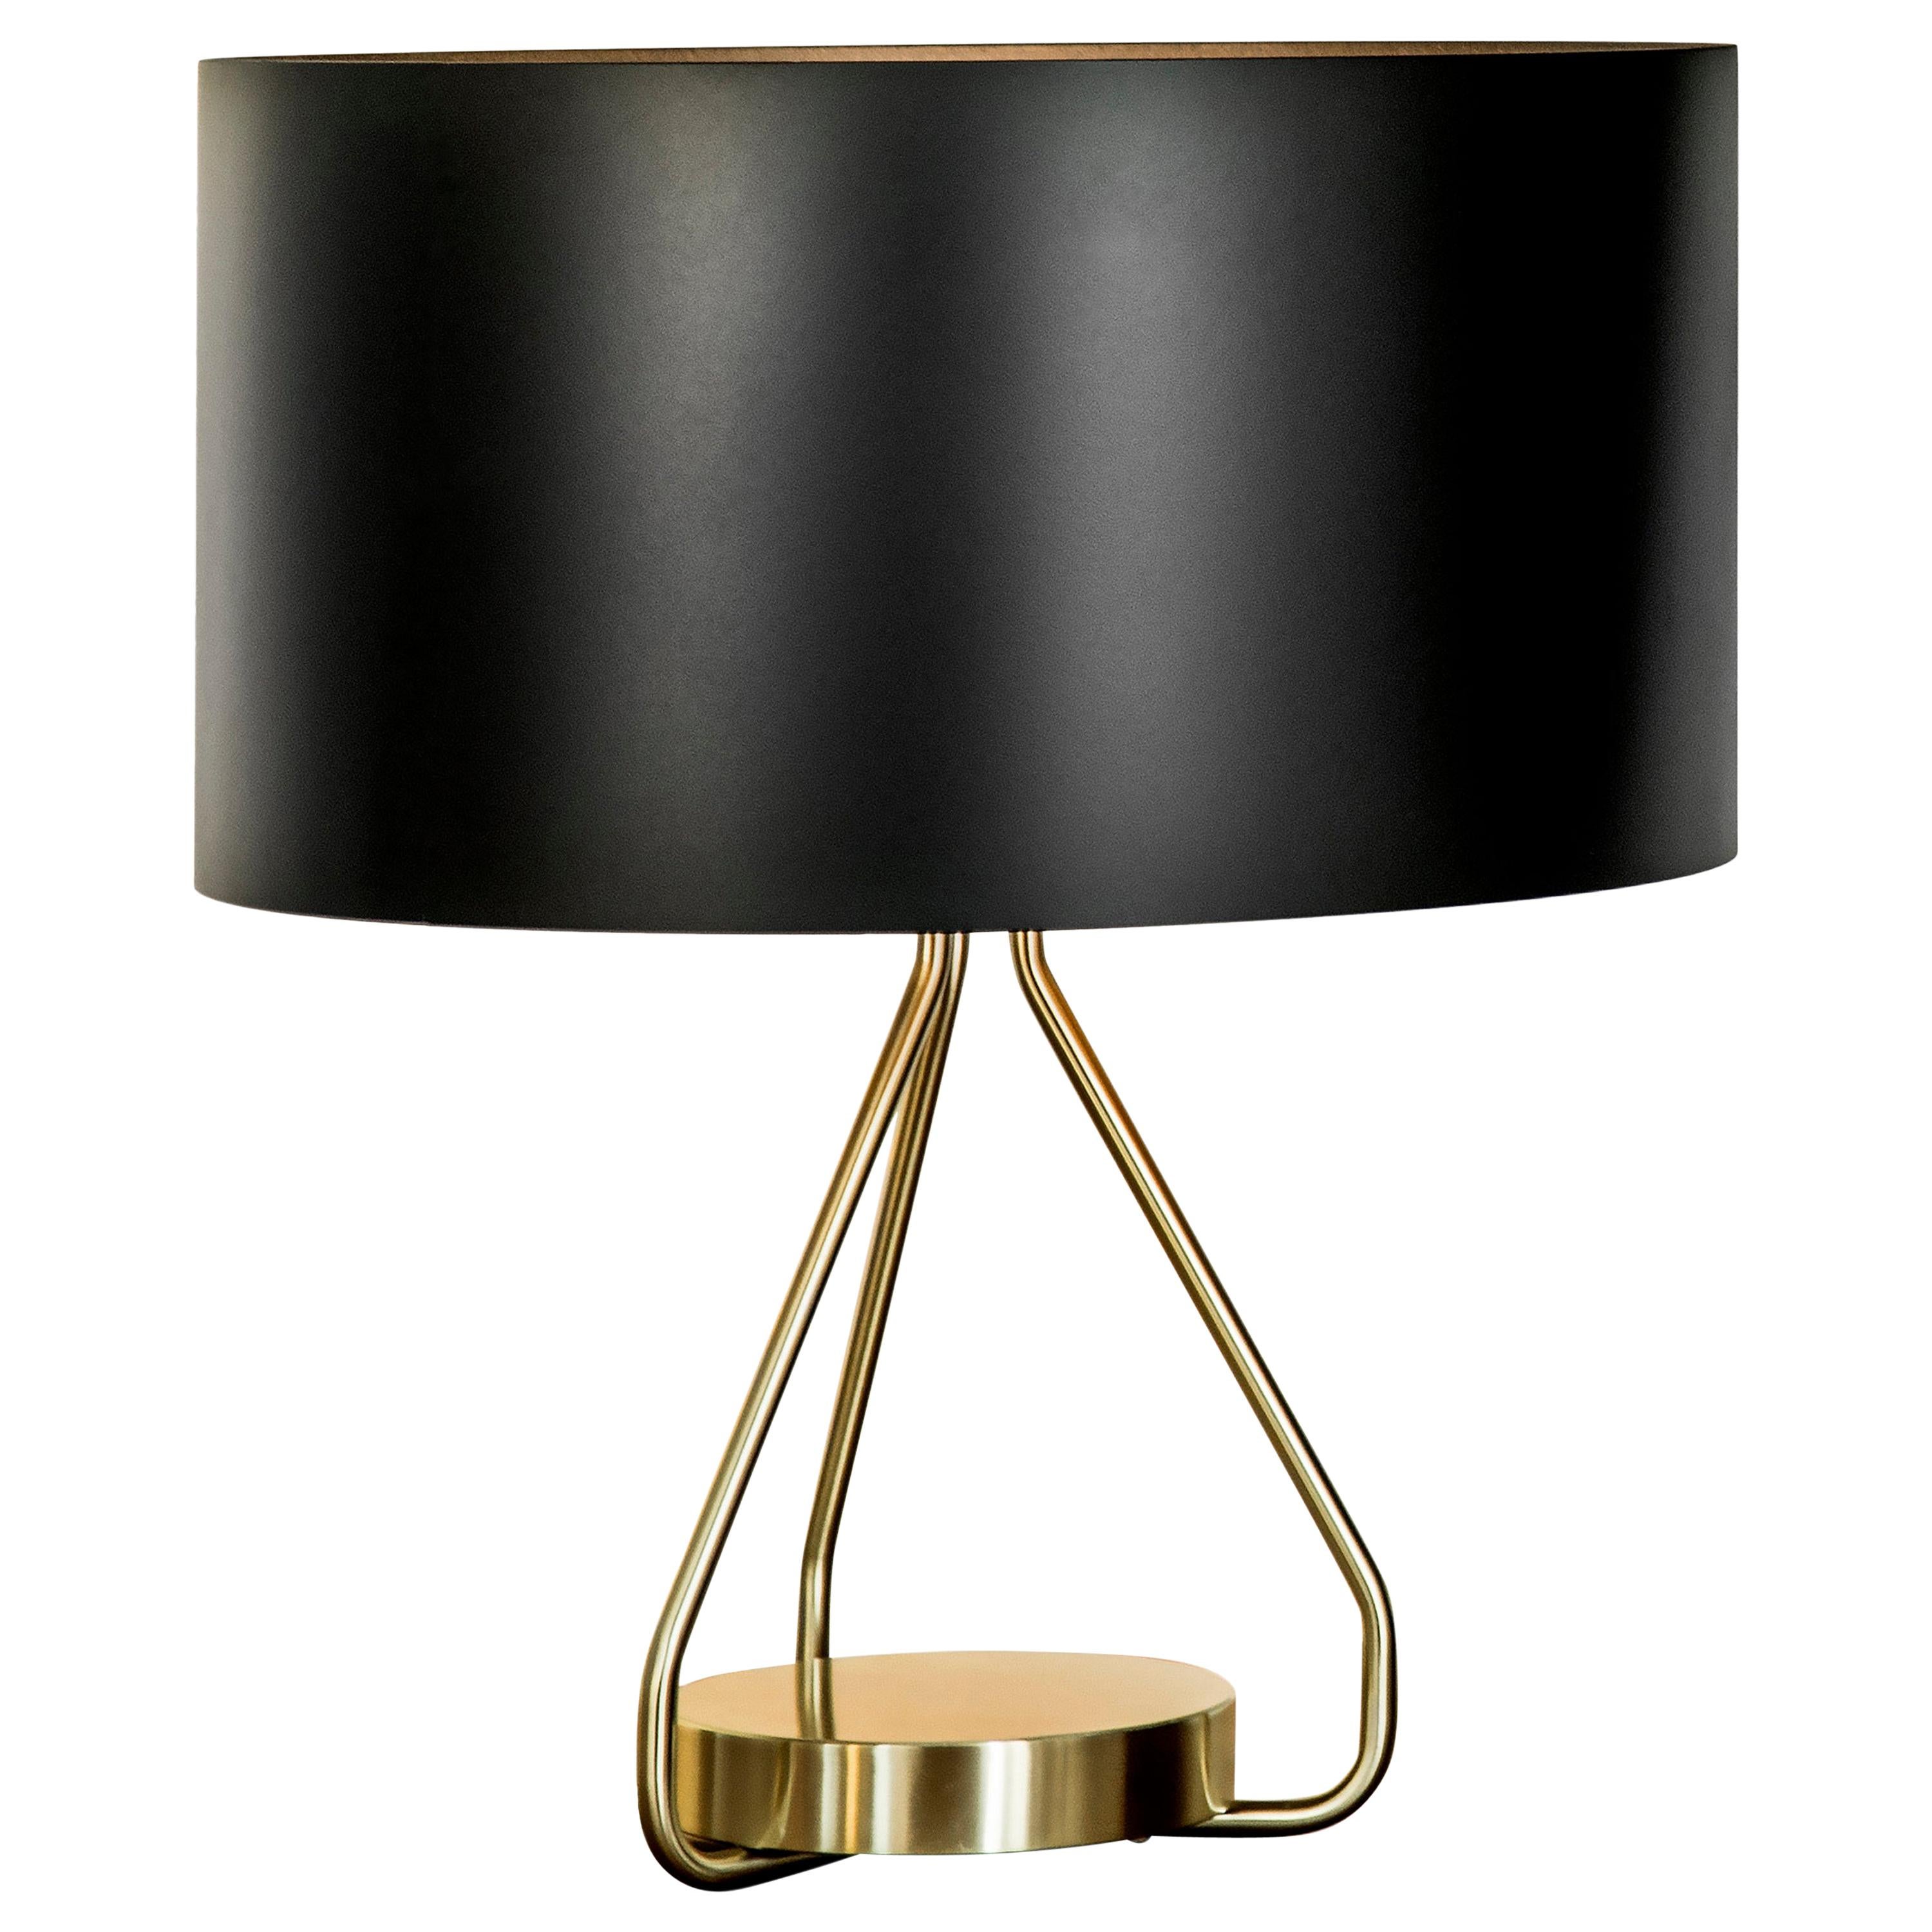 Table lamp with black paint lightshade, brushed brass structure and solid brushed brass base.